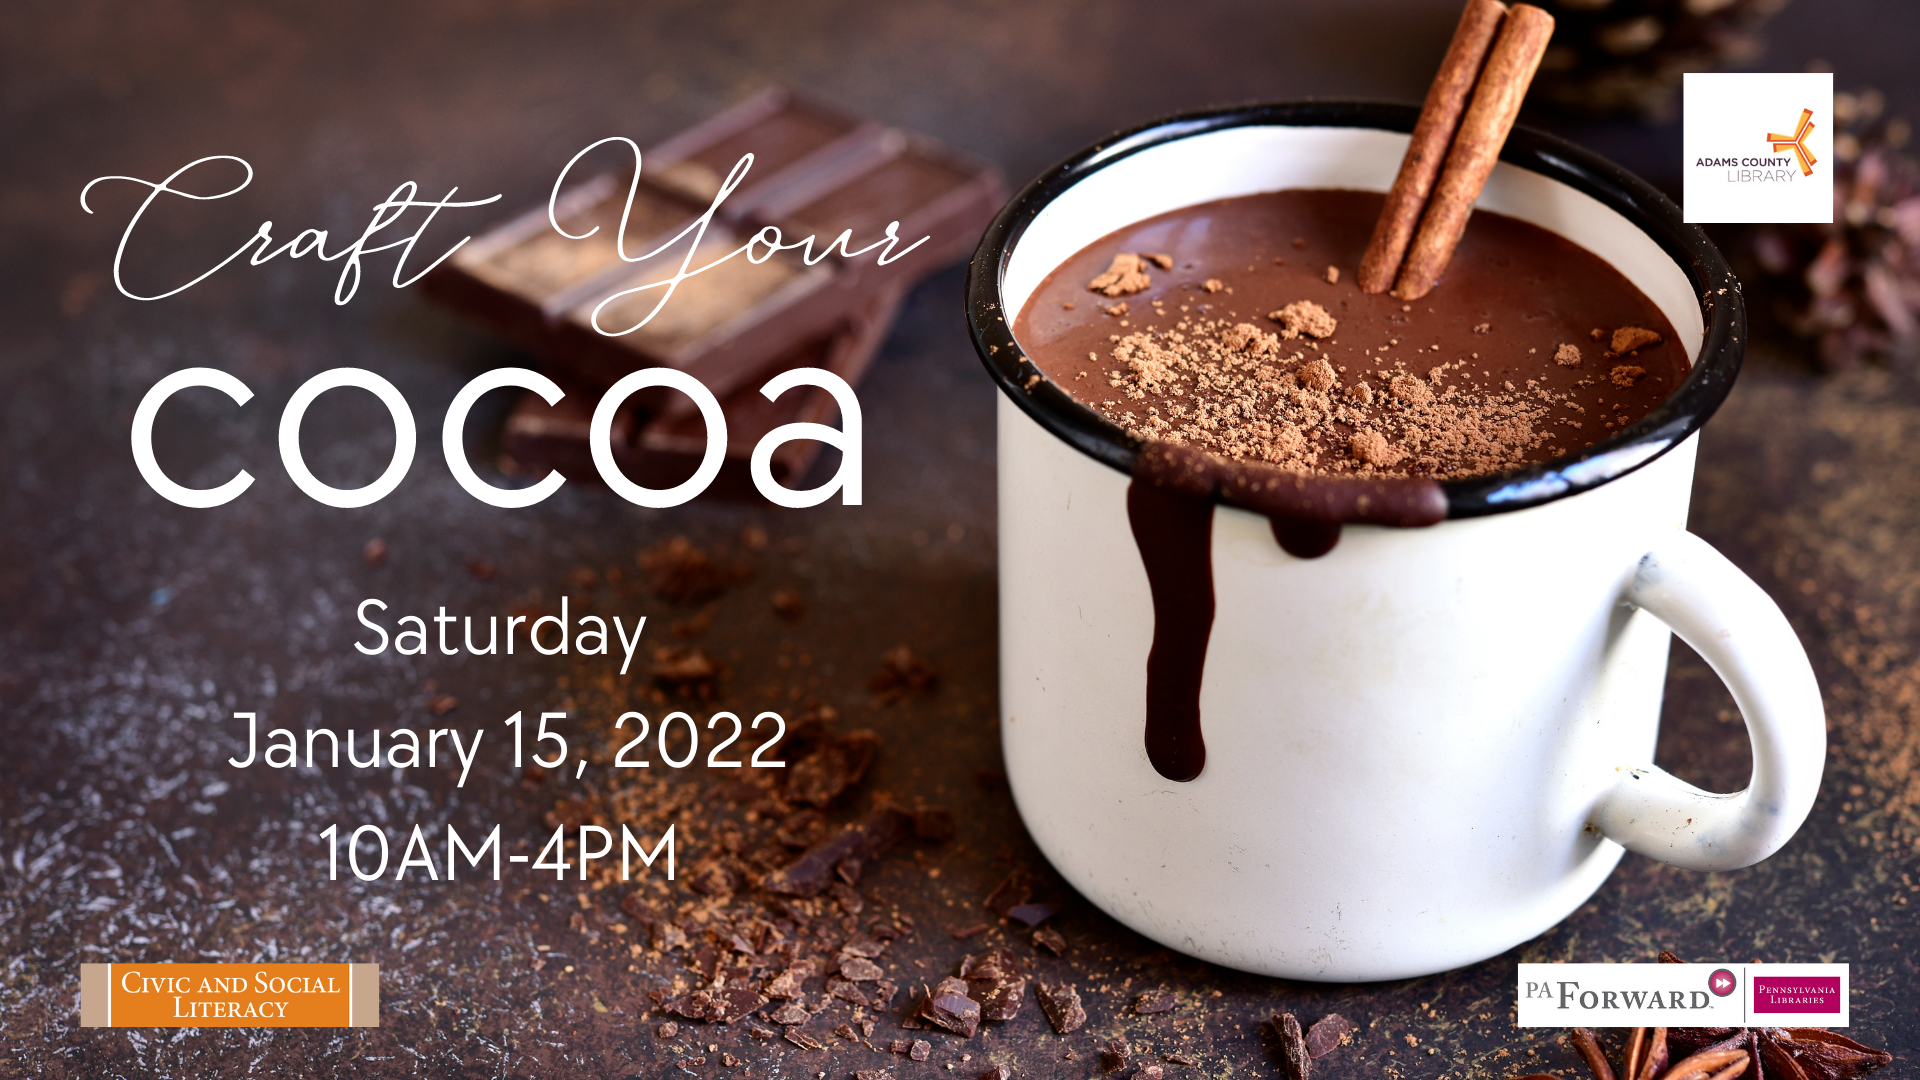 Drop in during open hours on Saturday, January 15, 2022 to craft your own cup of hot cocoa!